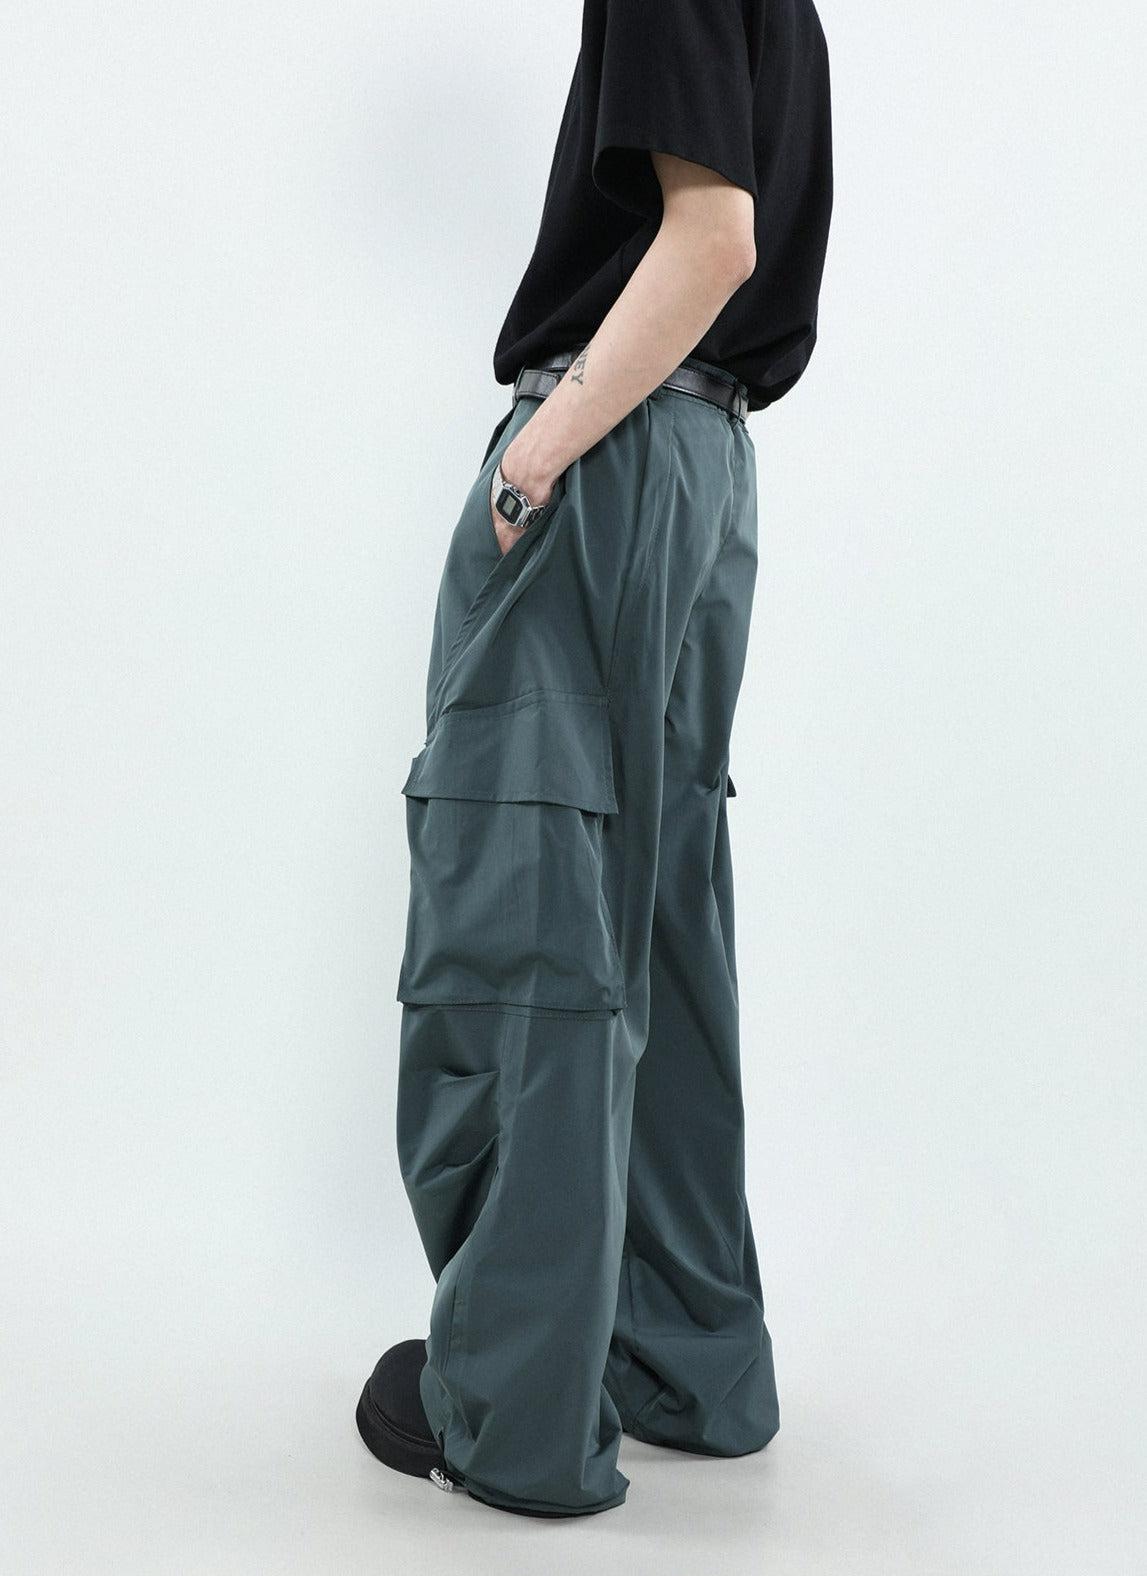 Mr Nearly Solid Wide Leg Cargo Pants Korean Street Fashion Pants By Mr Nearly Shop Online at OH Vault